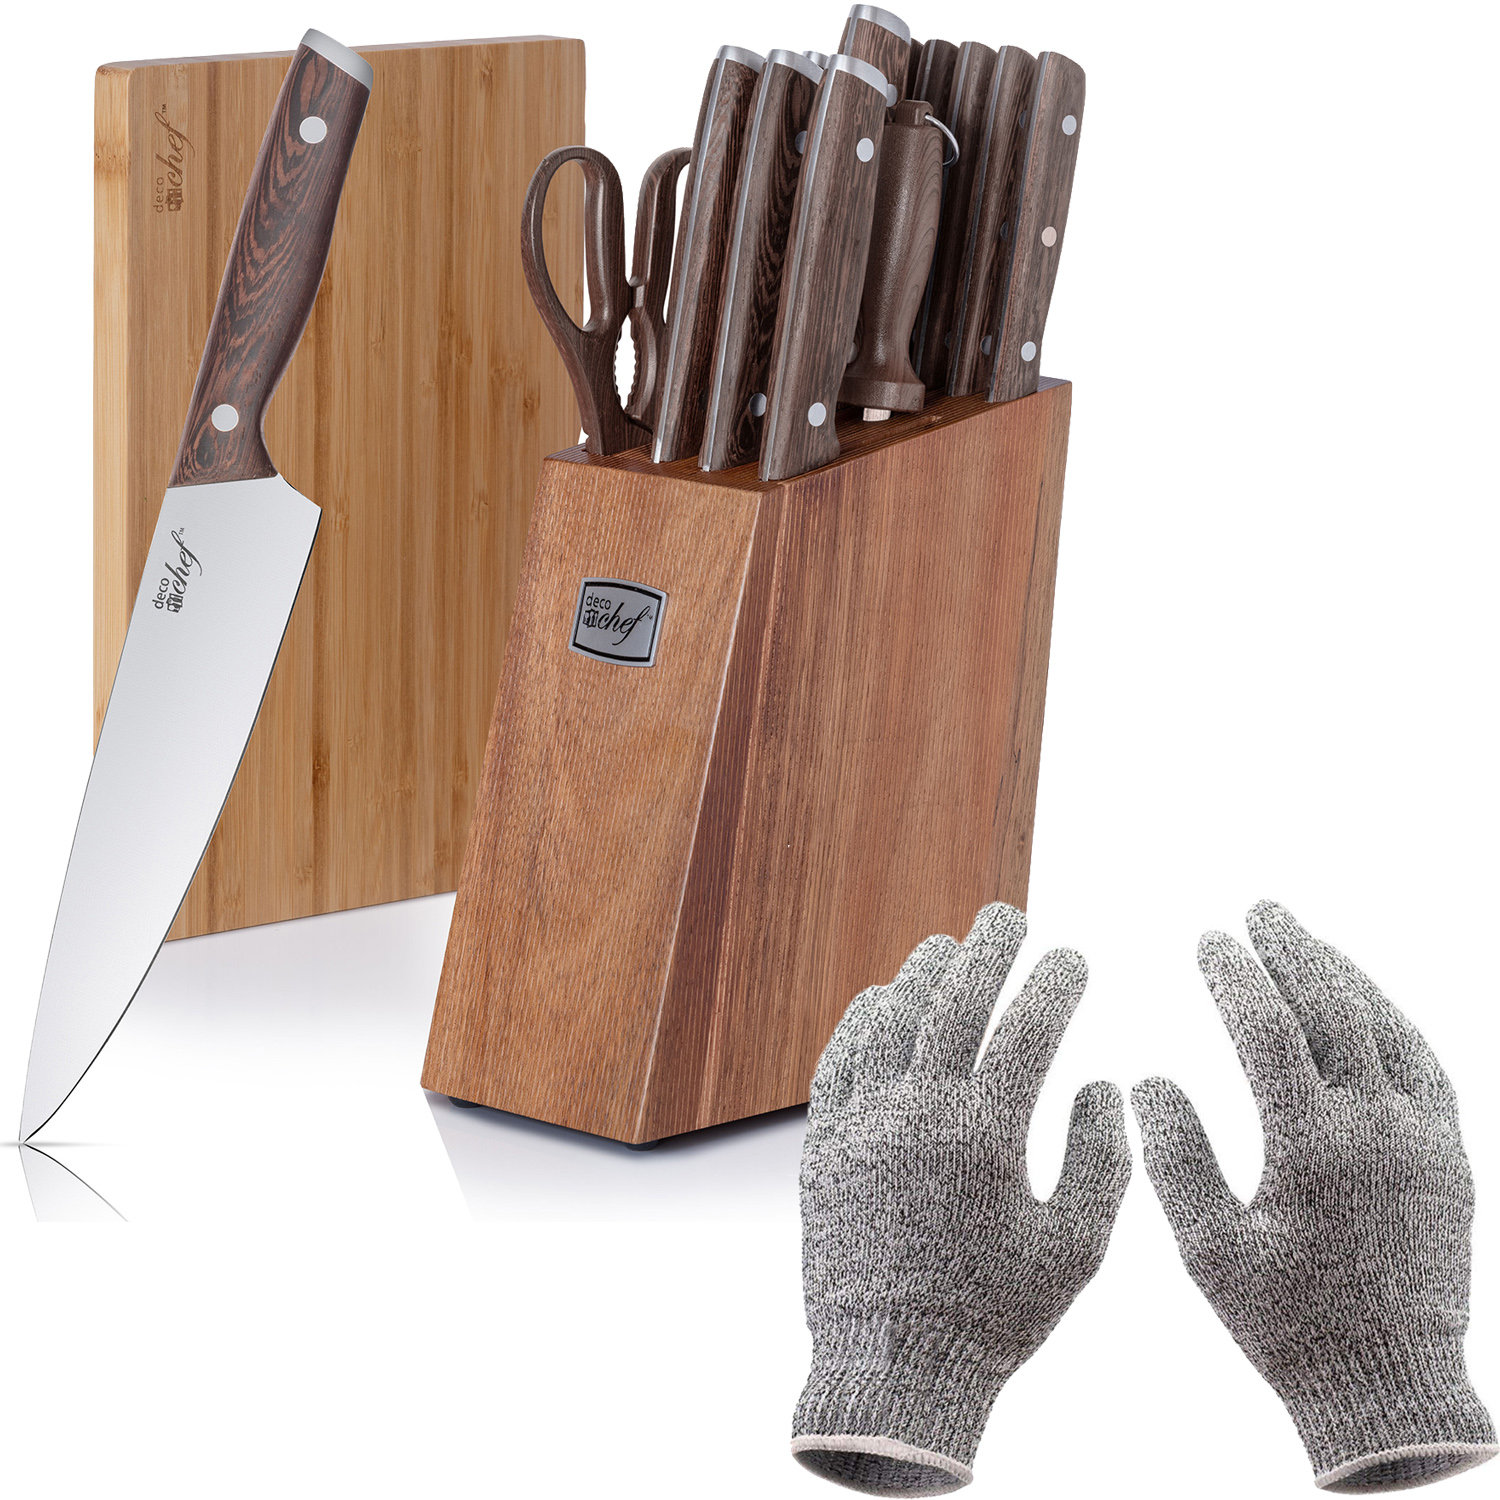 Core Home Perfect Precision 12pc Knife Set - Stainless Steel